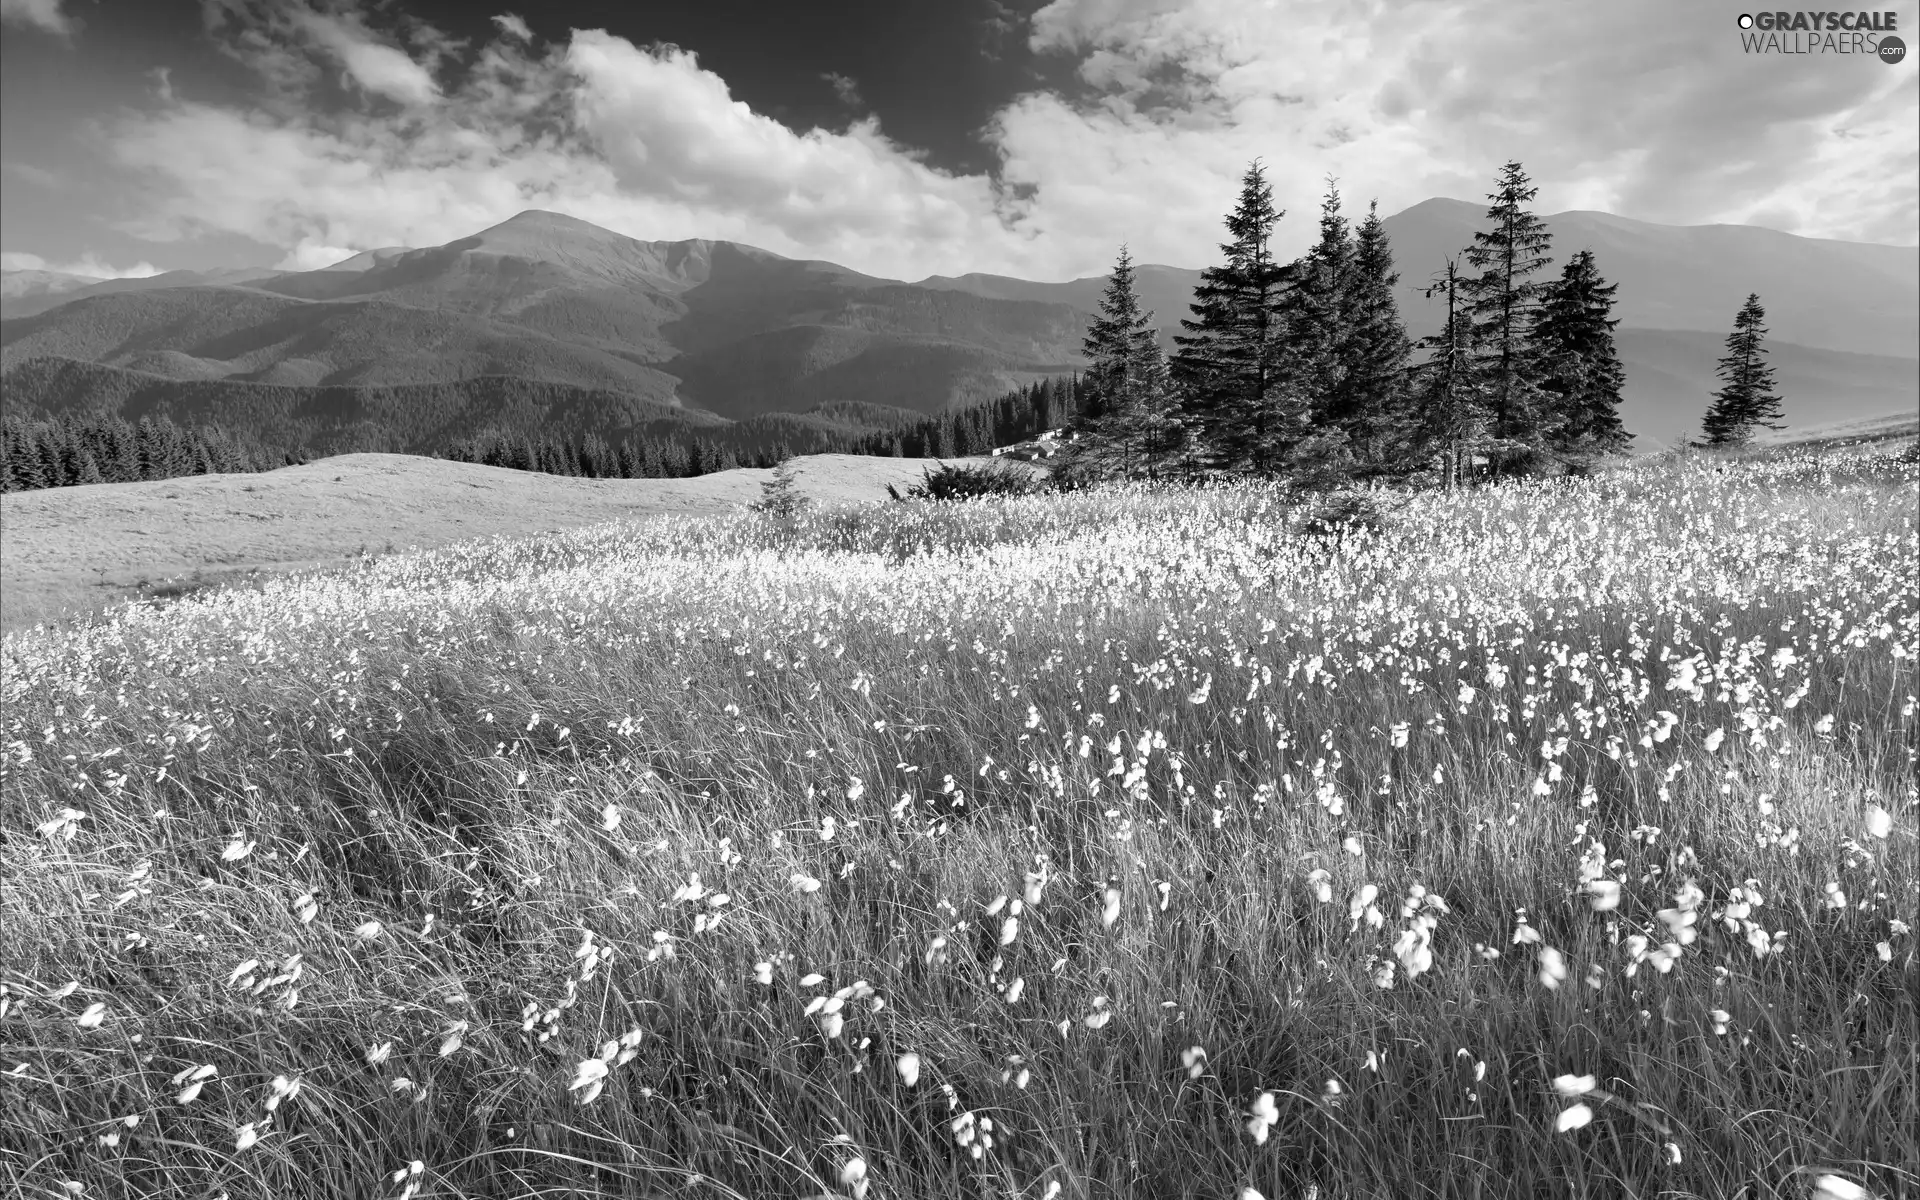 woods, Meadow, clouds, Spring, Mountains, Flowers